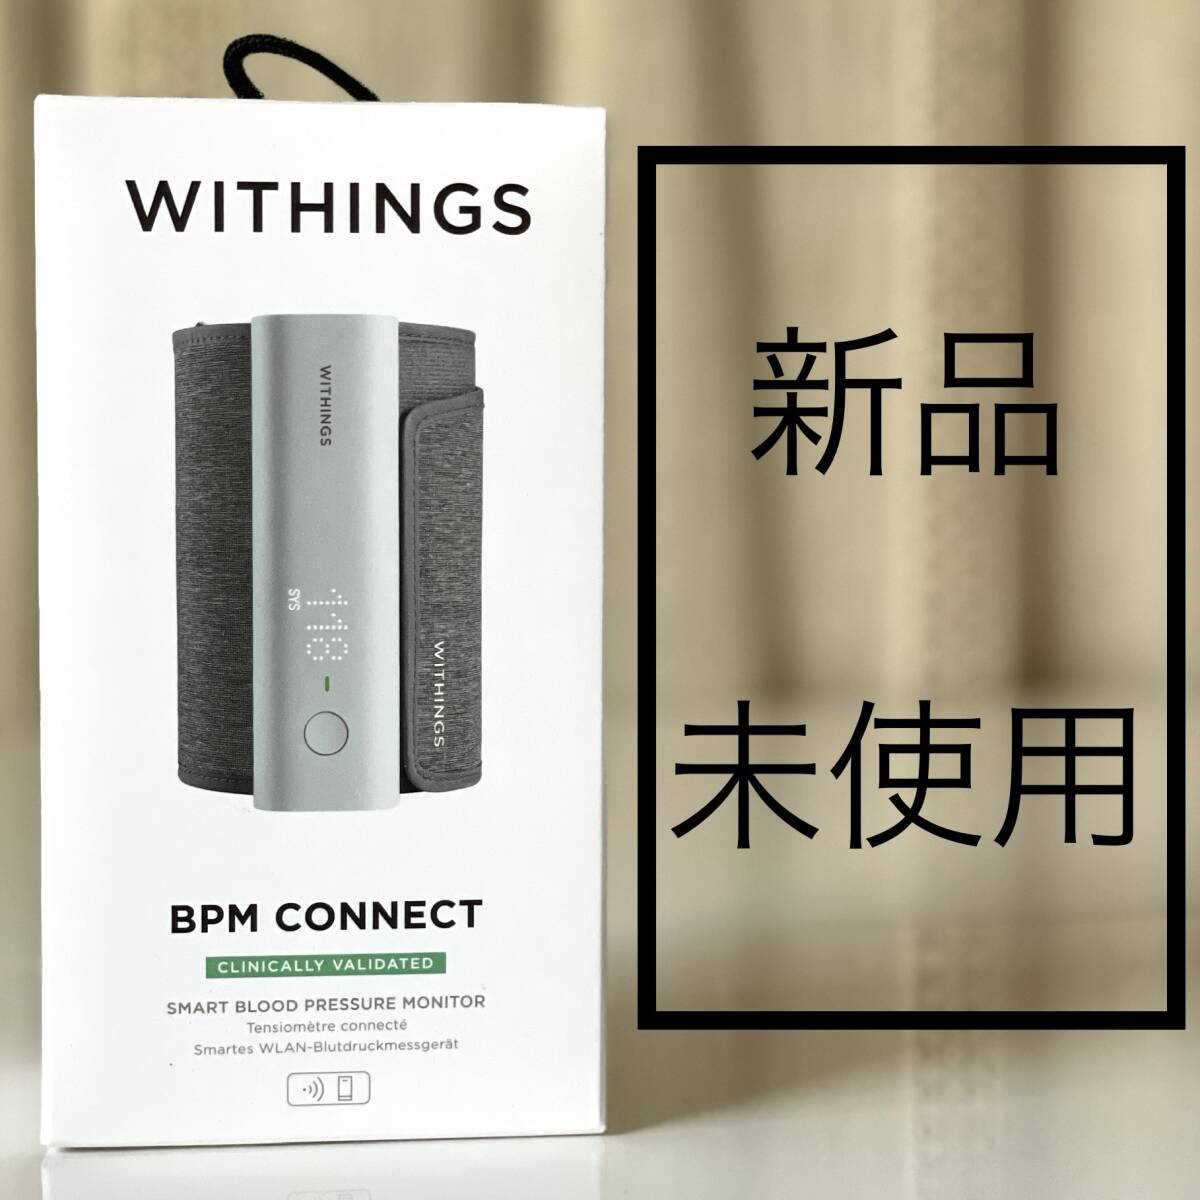 Withings BPM Connect blood pressure monitor compact 